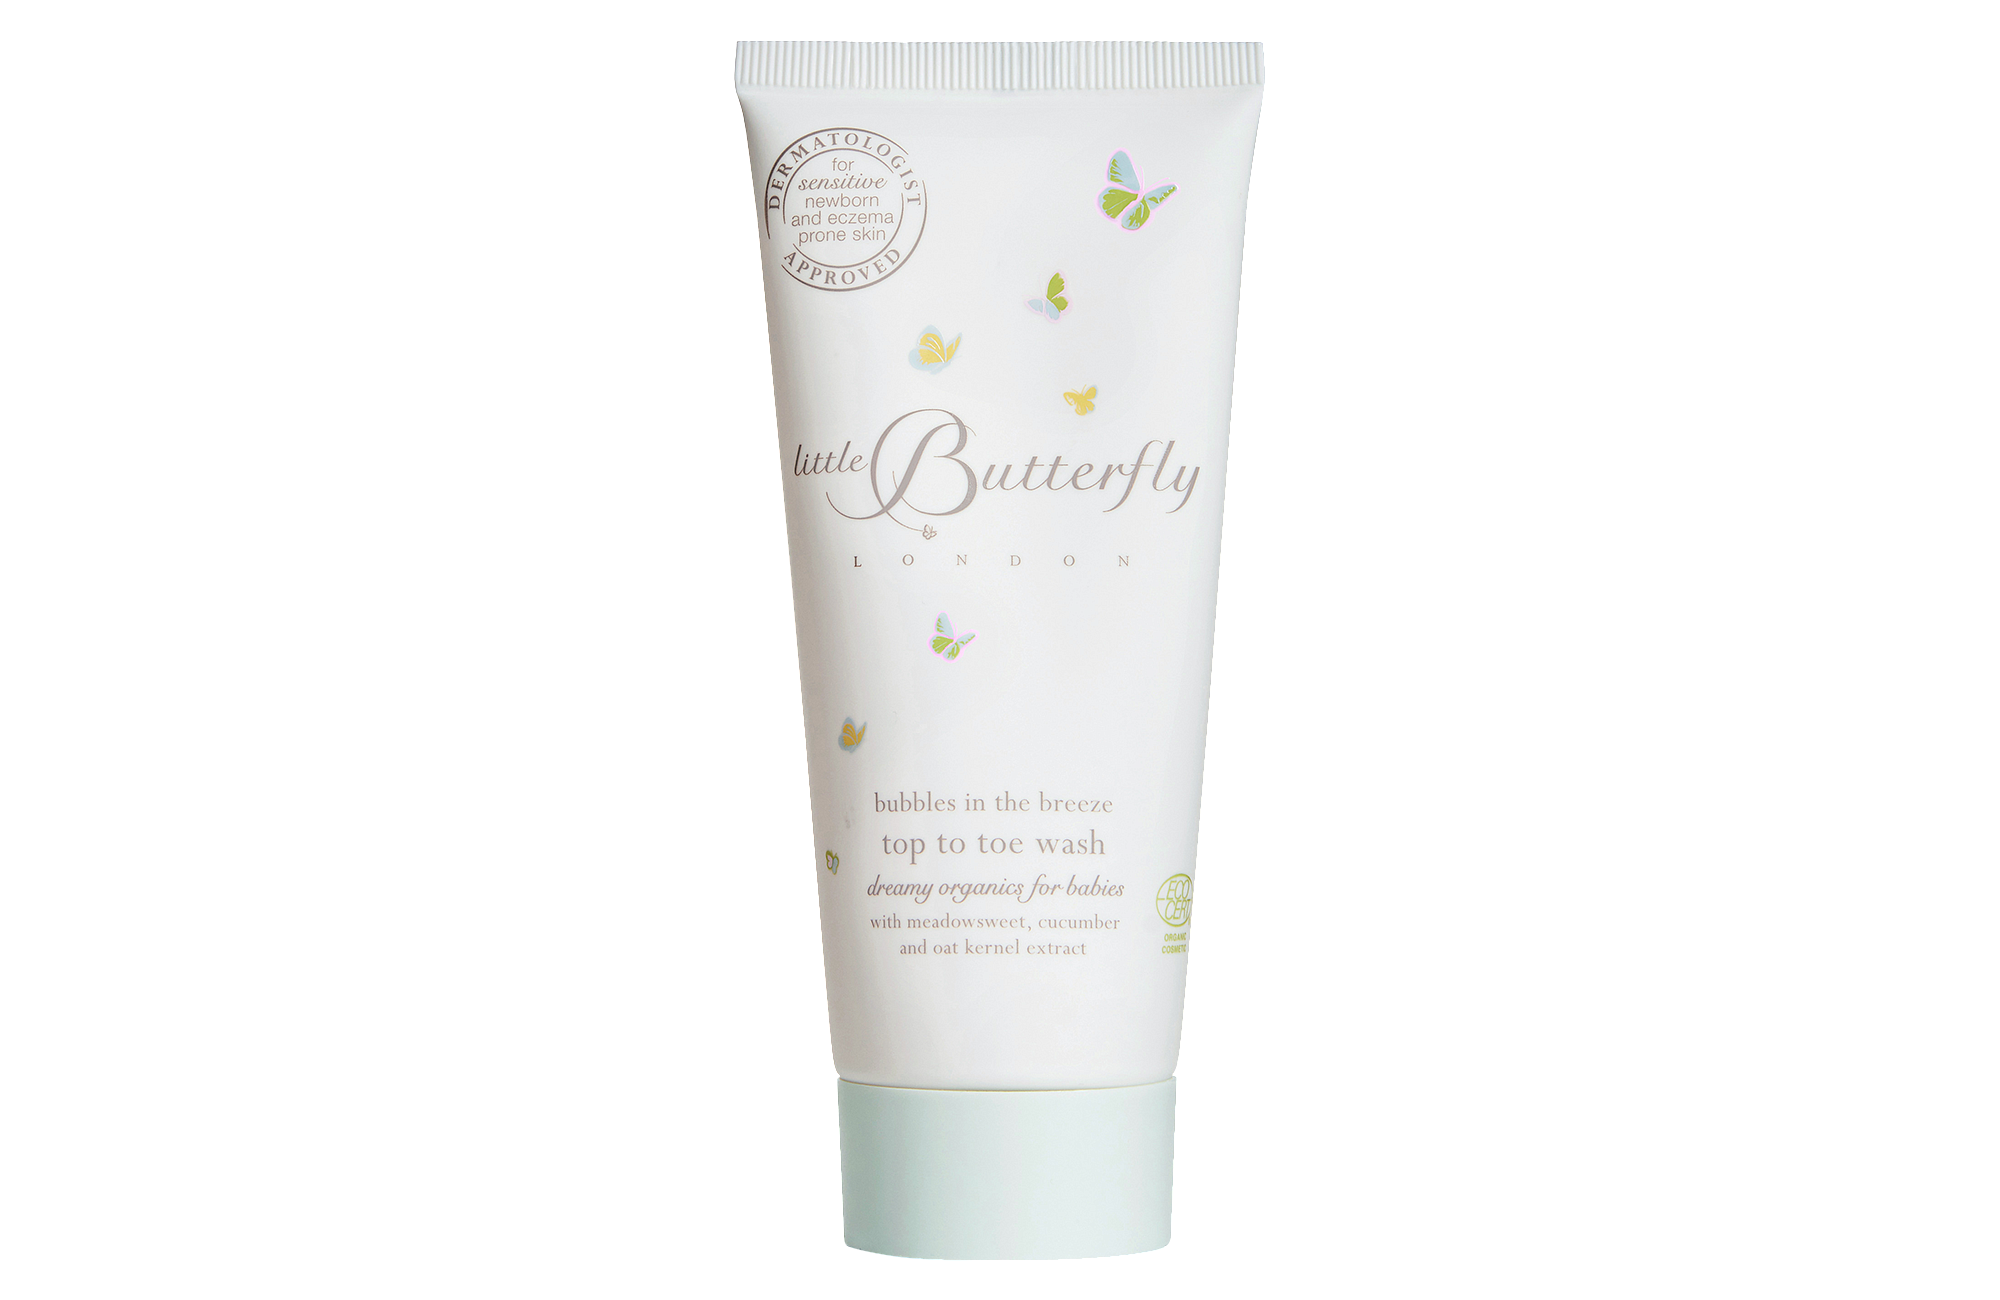 Top to toe wash «Bubbles in the breeze»